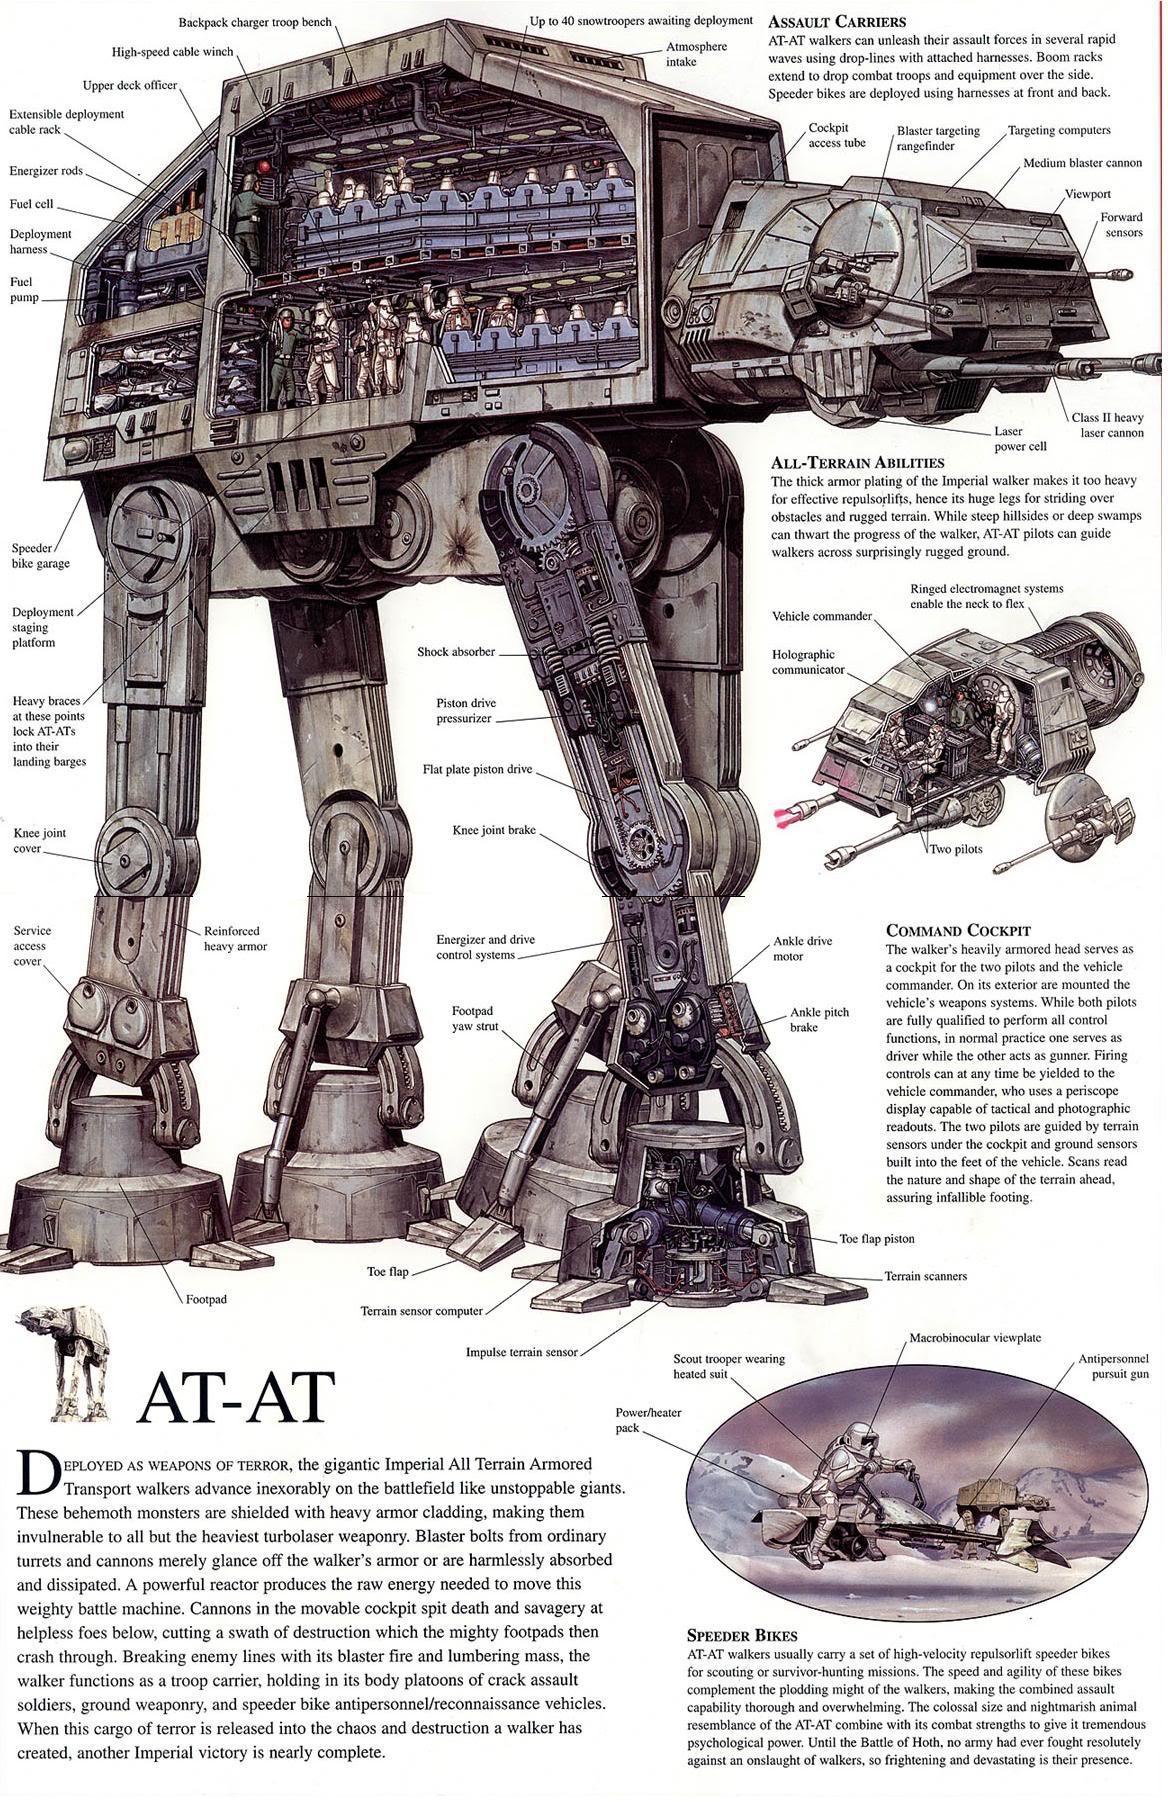 A Never Before Seen Look Inside An AT-AT Imperial Walker